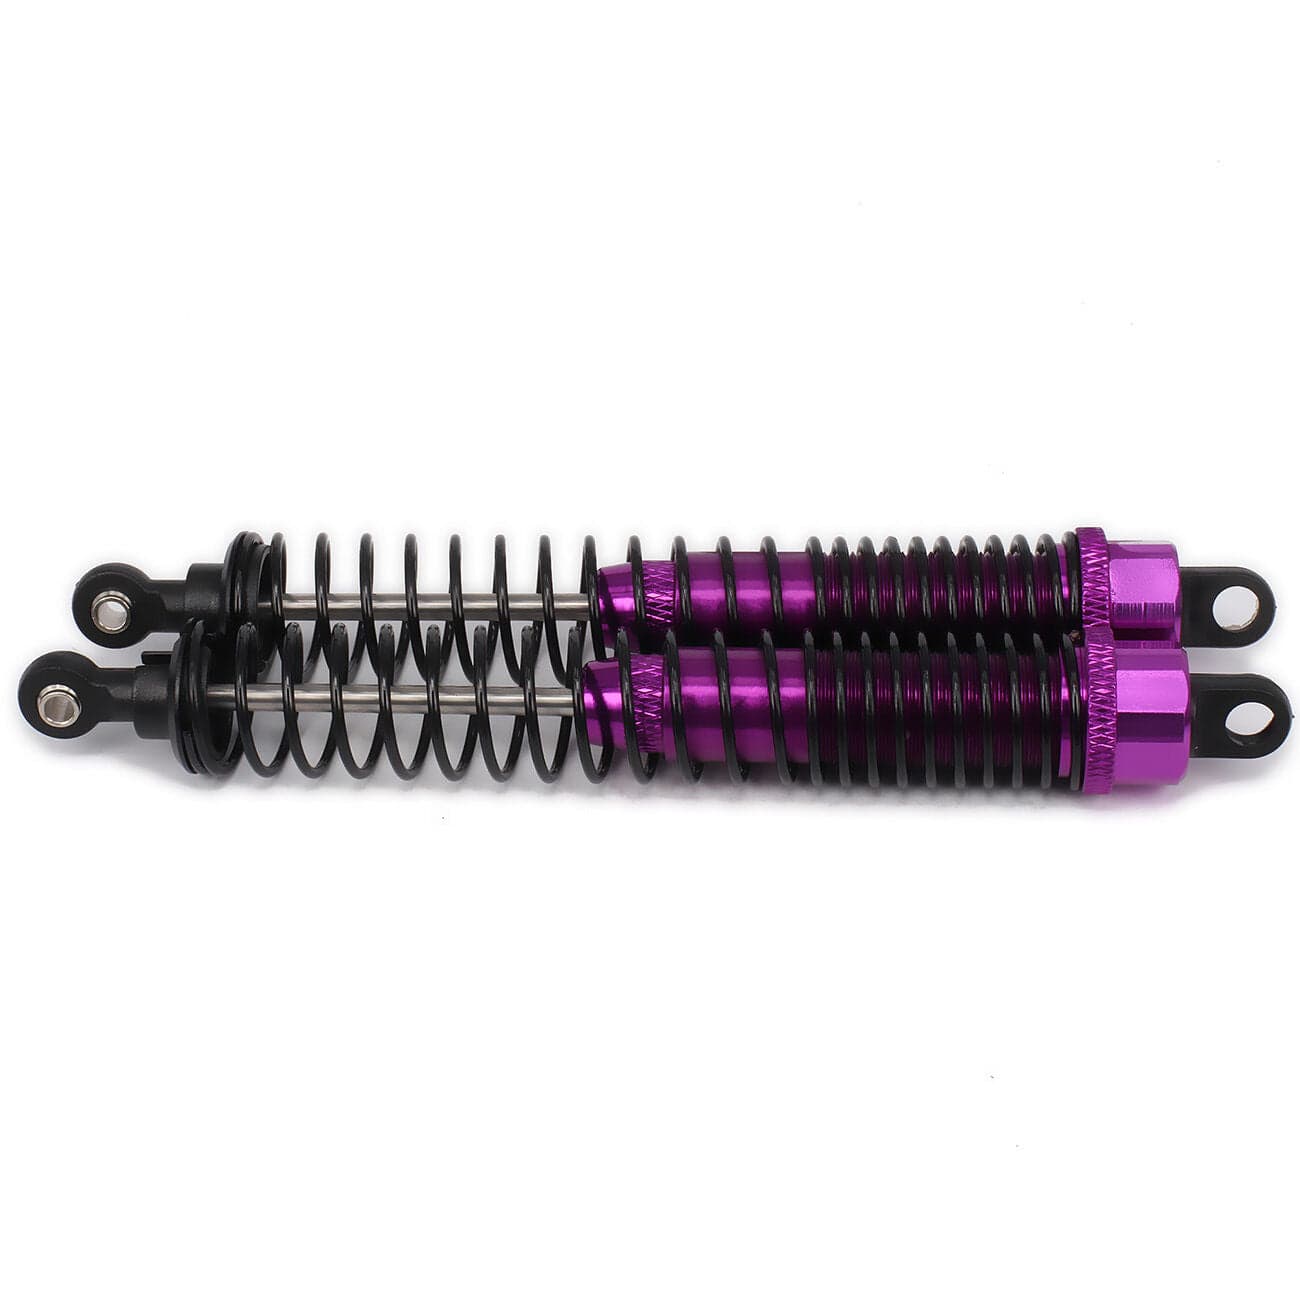 RCAWD RC CAR UPGRADE PARTS Purple RCAWD Adjustable 130mm RC Shock Absorber Damper For RC Car 1/10 Model Car 2PCS